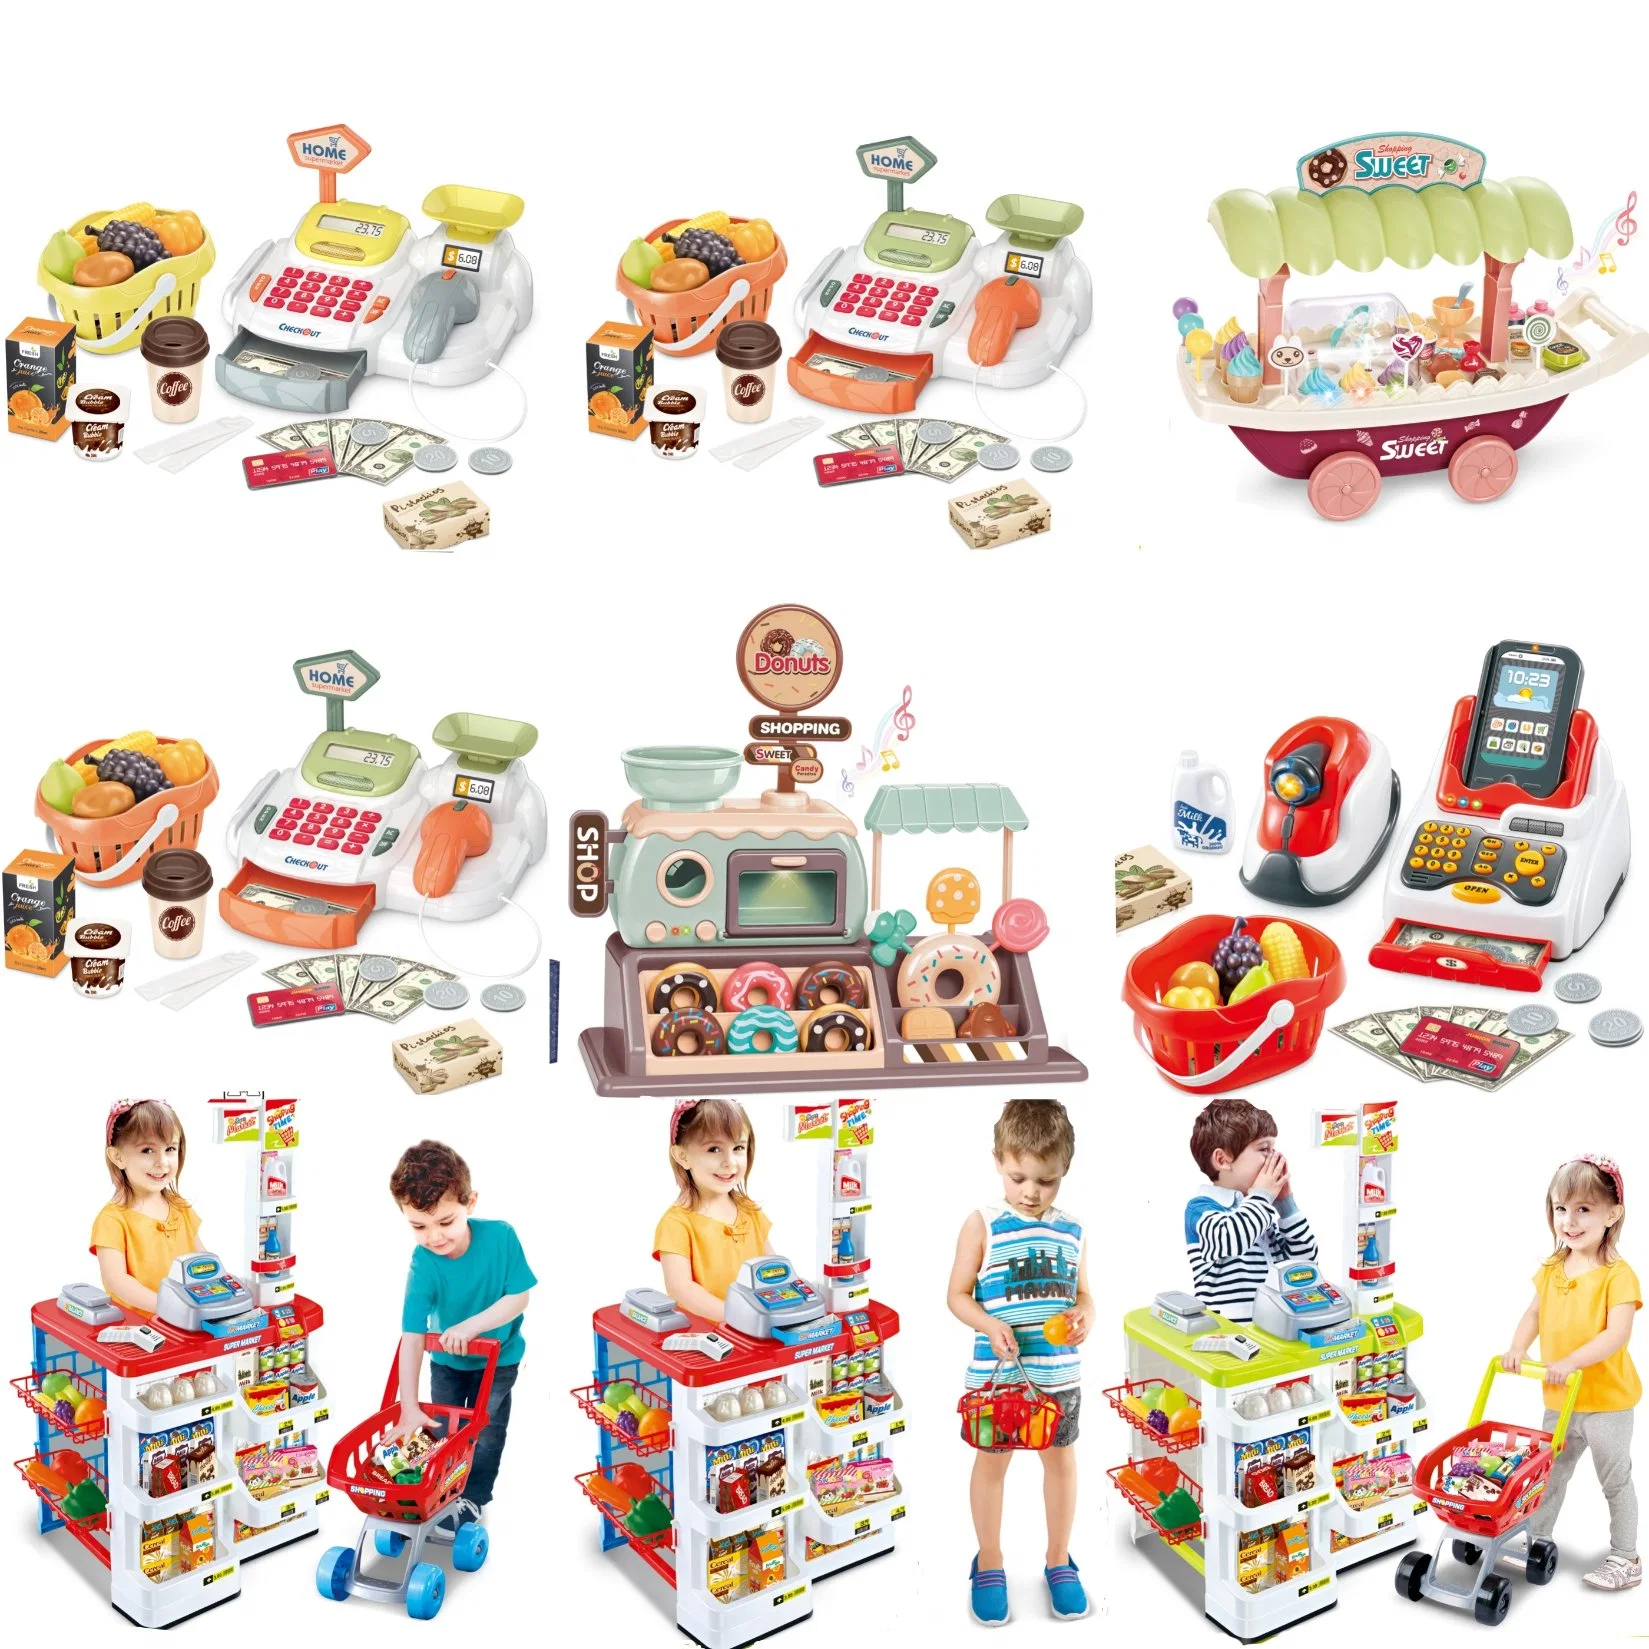 Tool Set with Engineering Cap 37PCS Pretend Play Kitchen Doll Toy Plastic Children Kids Toy DIY Self-Assembling Factory Direct Sales Wholesale/Supplier Intellectual E